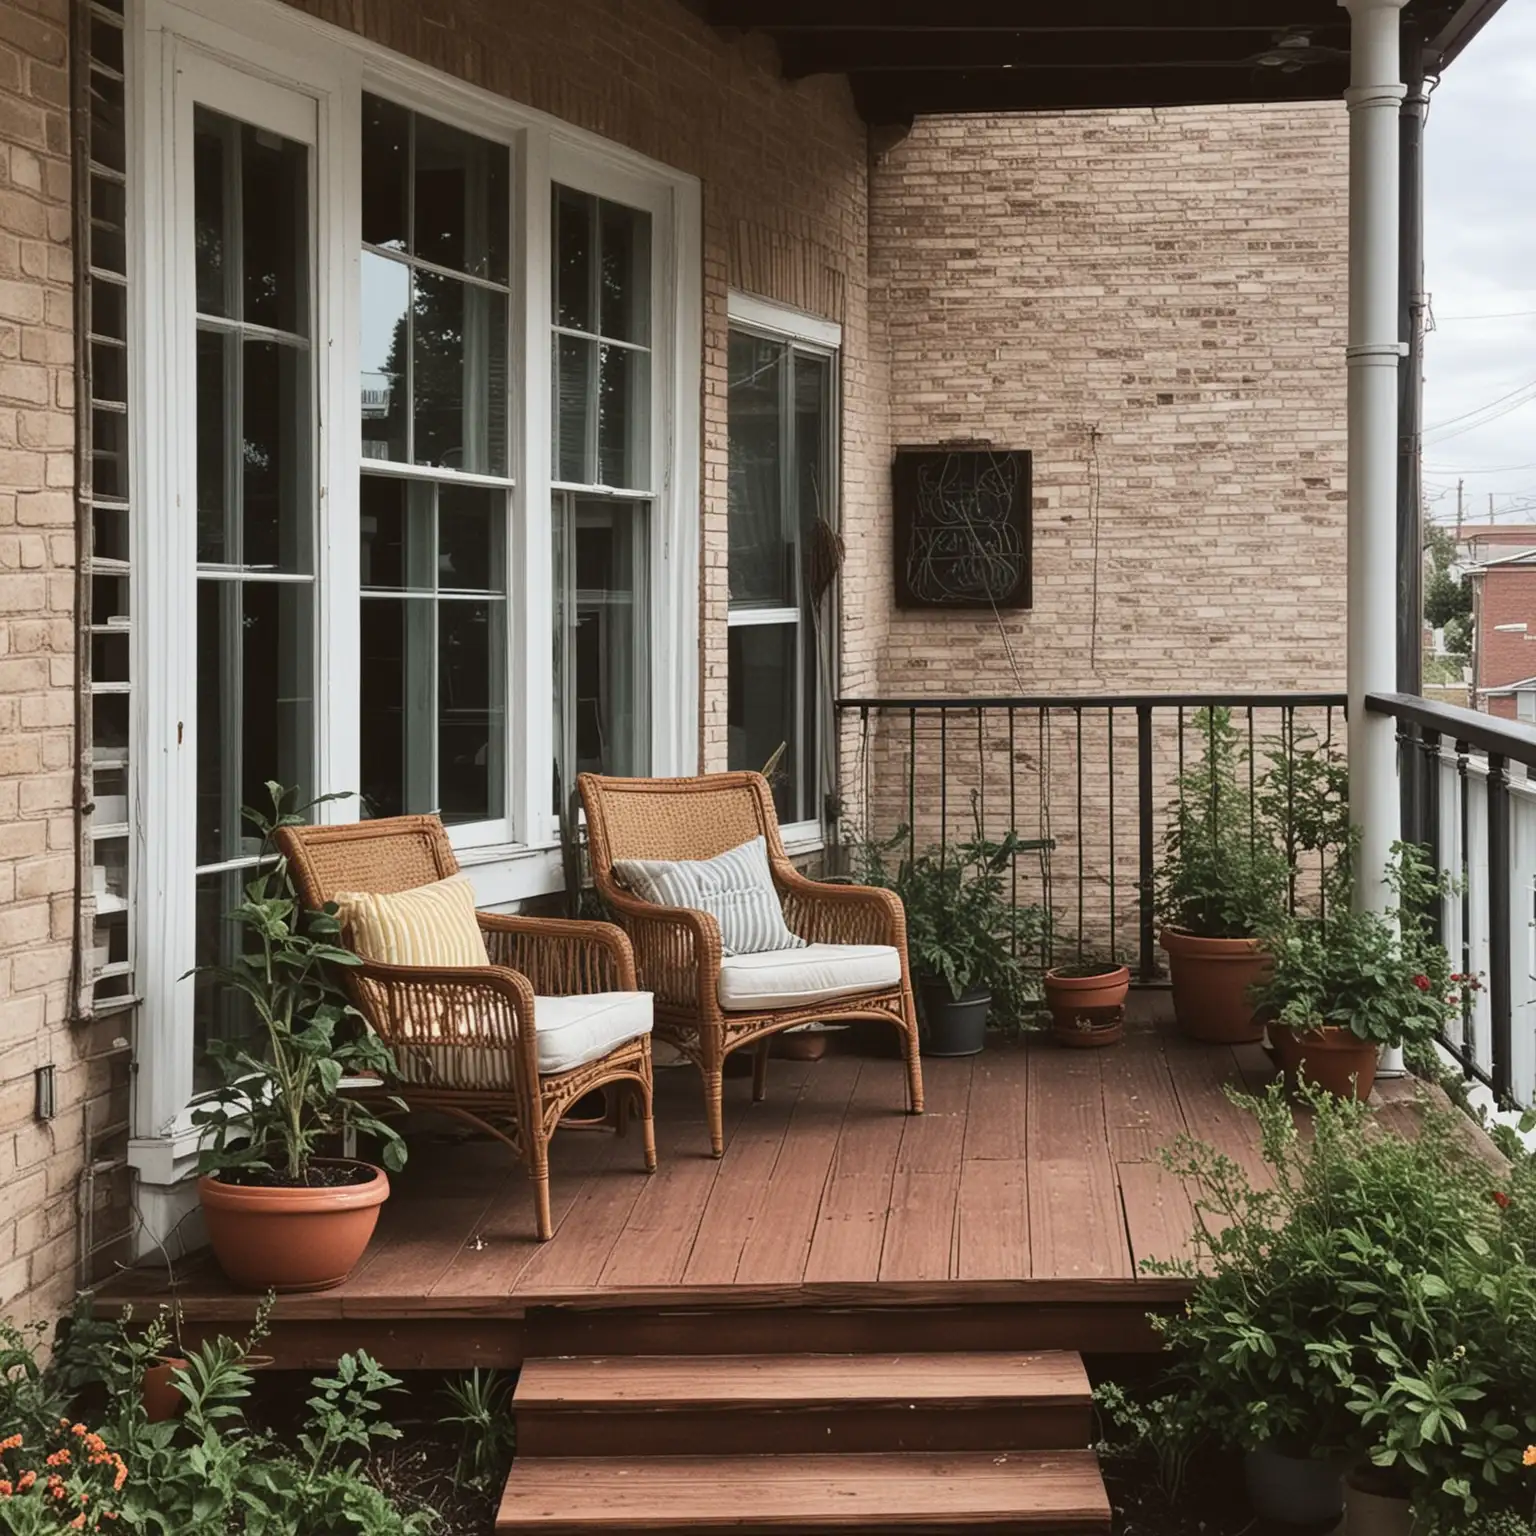 Chic Urban Porch Scenes with Aesthetic Appeal